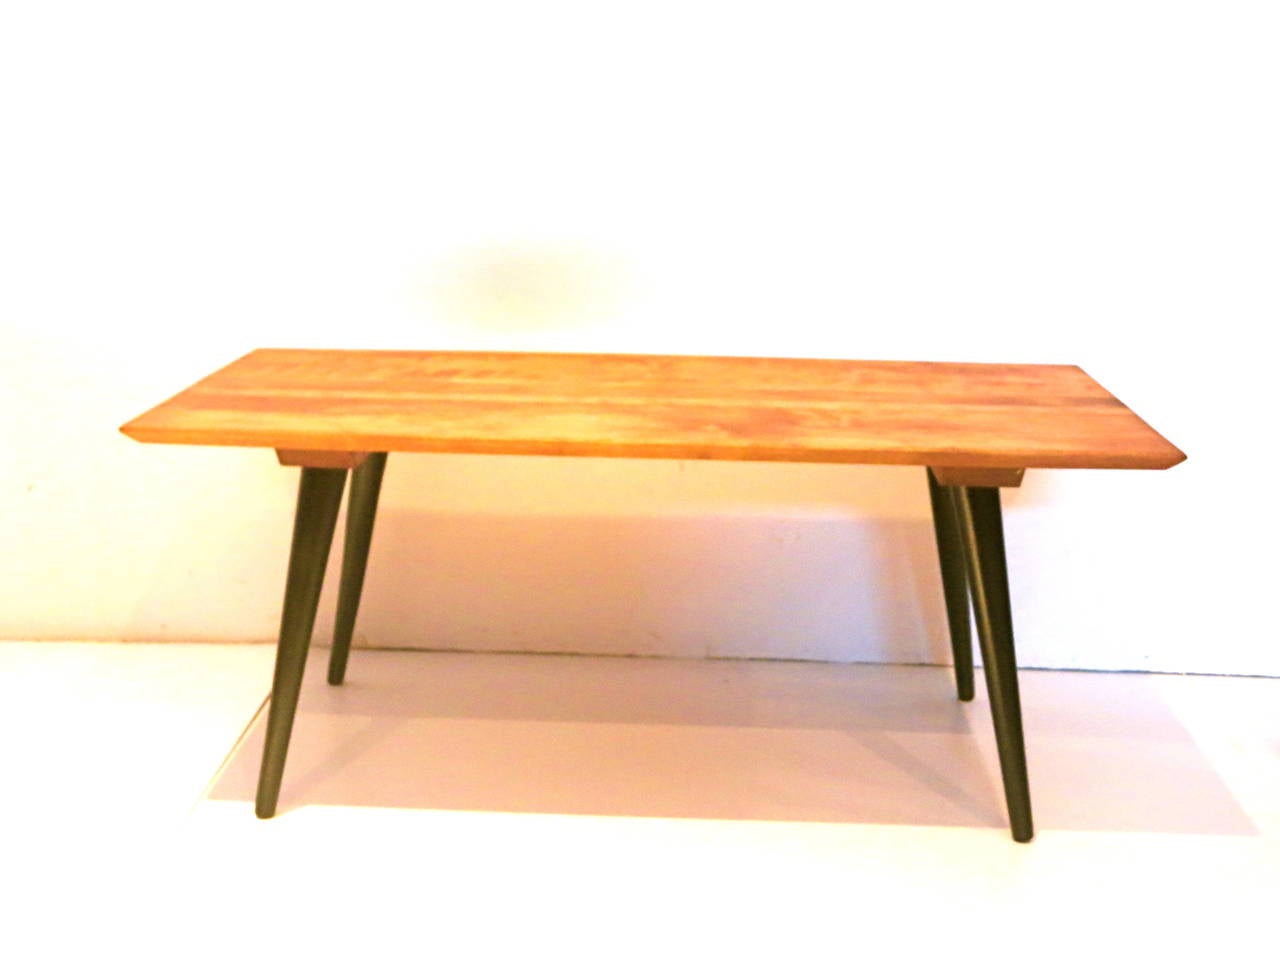 20th Century American Modern small coffee table by Paul McCobb for Winchendon early prod.